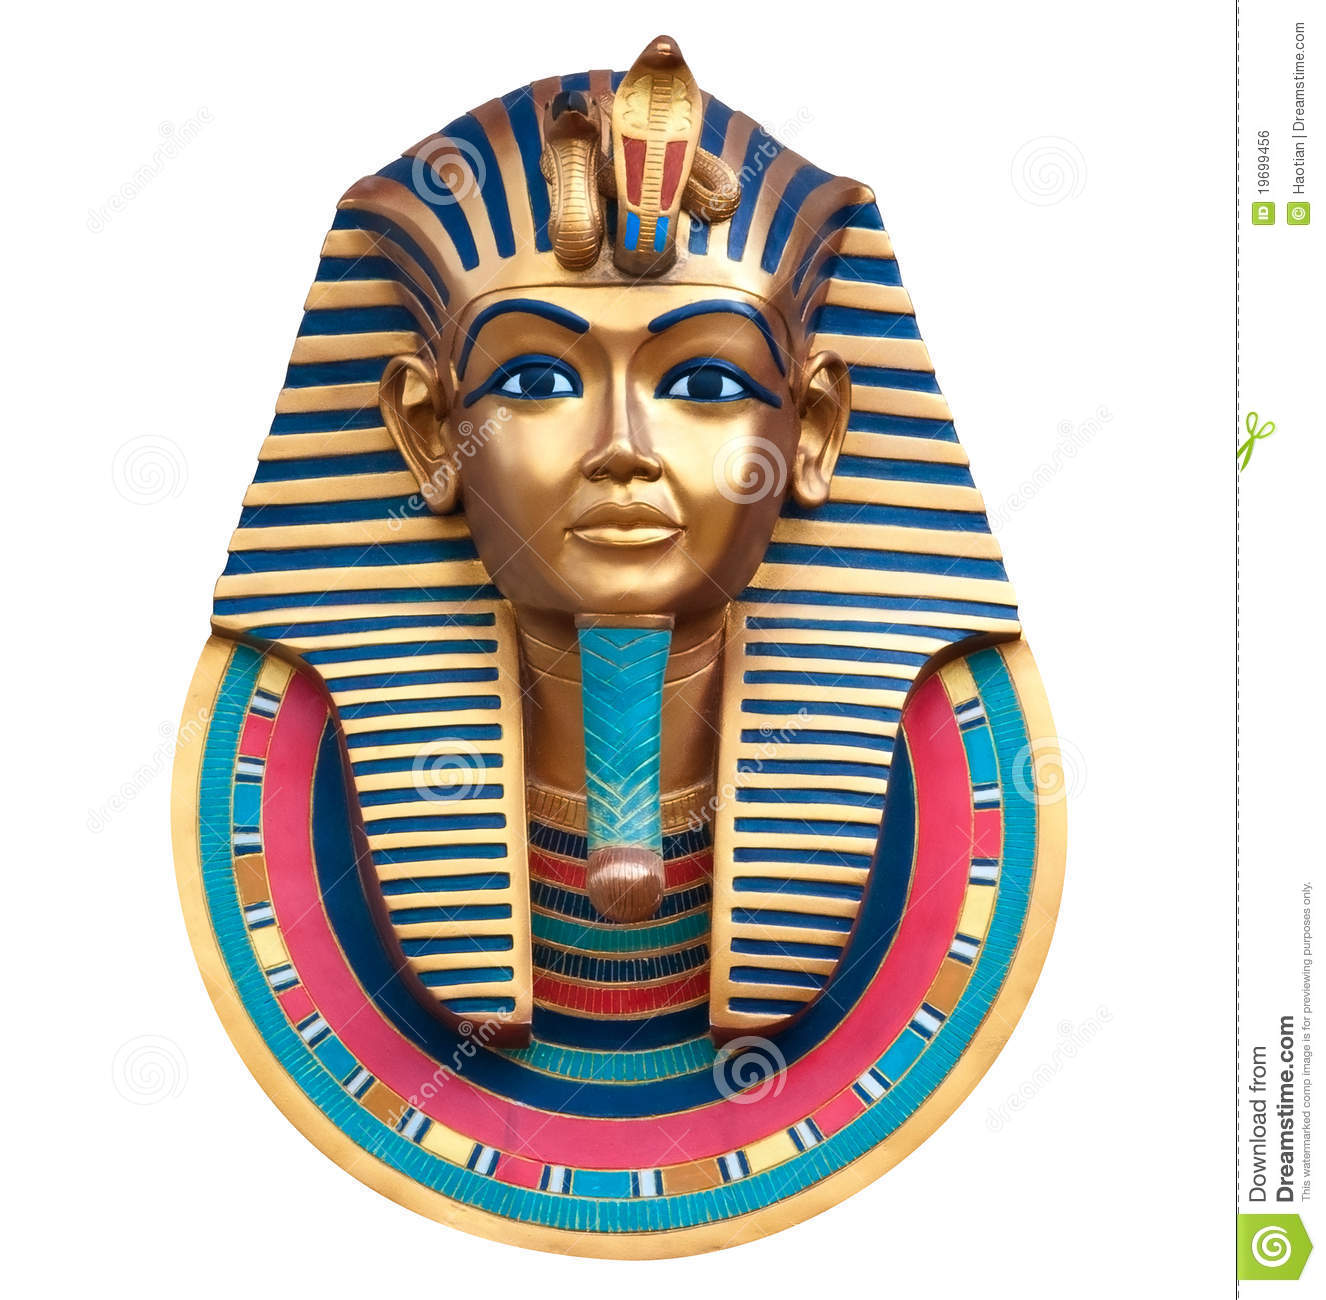 King tut clipart - Clipground